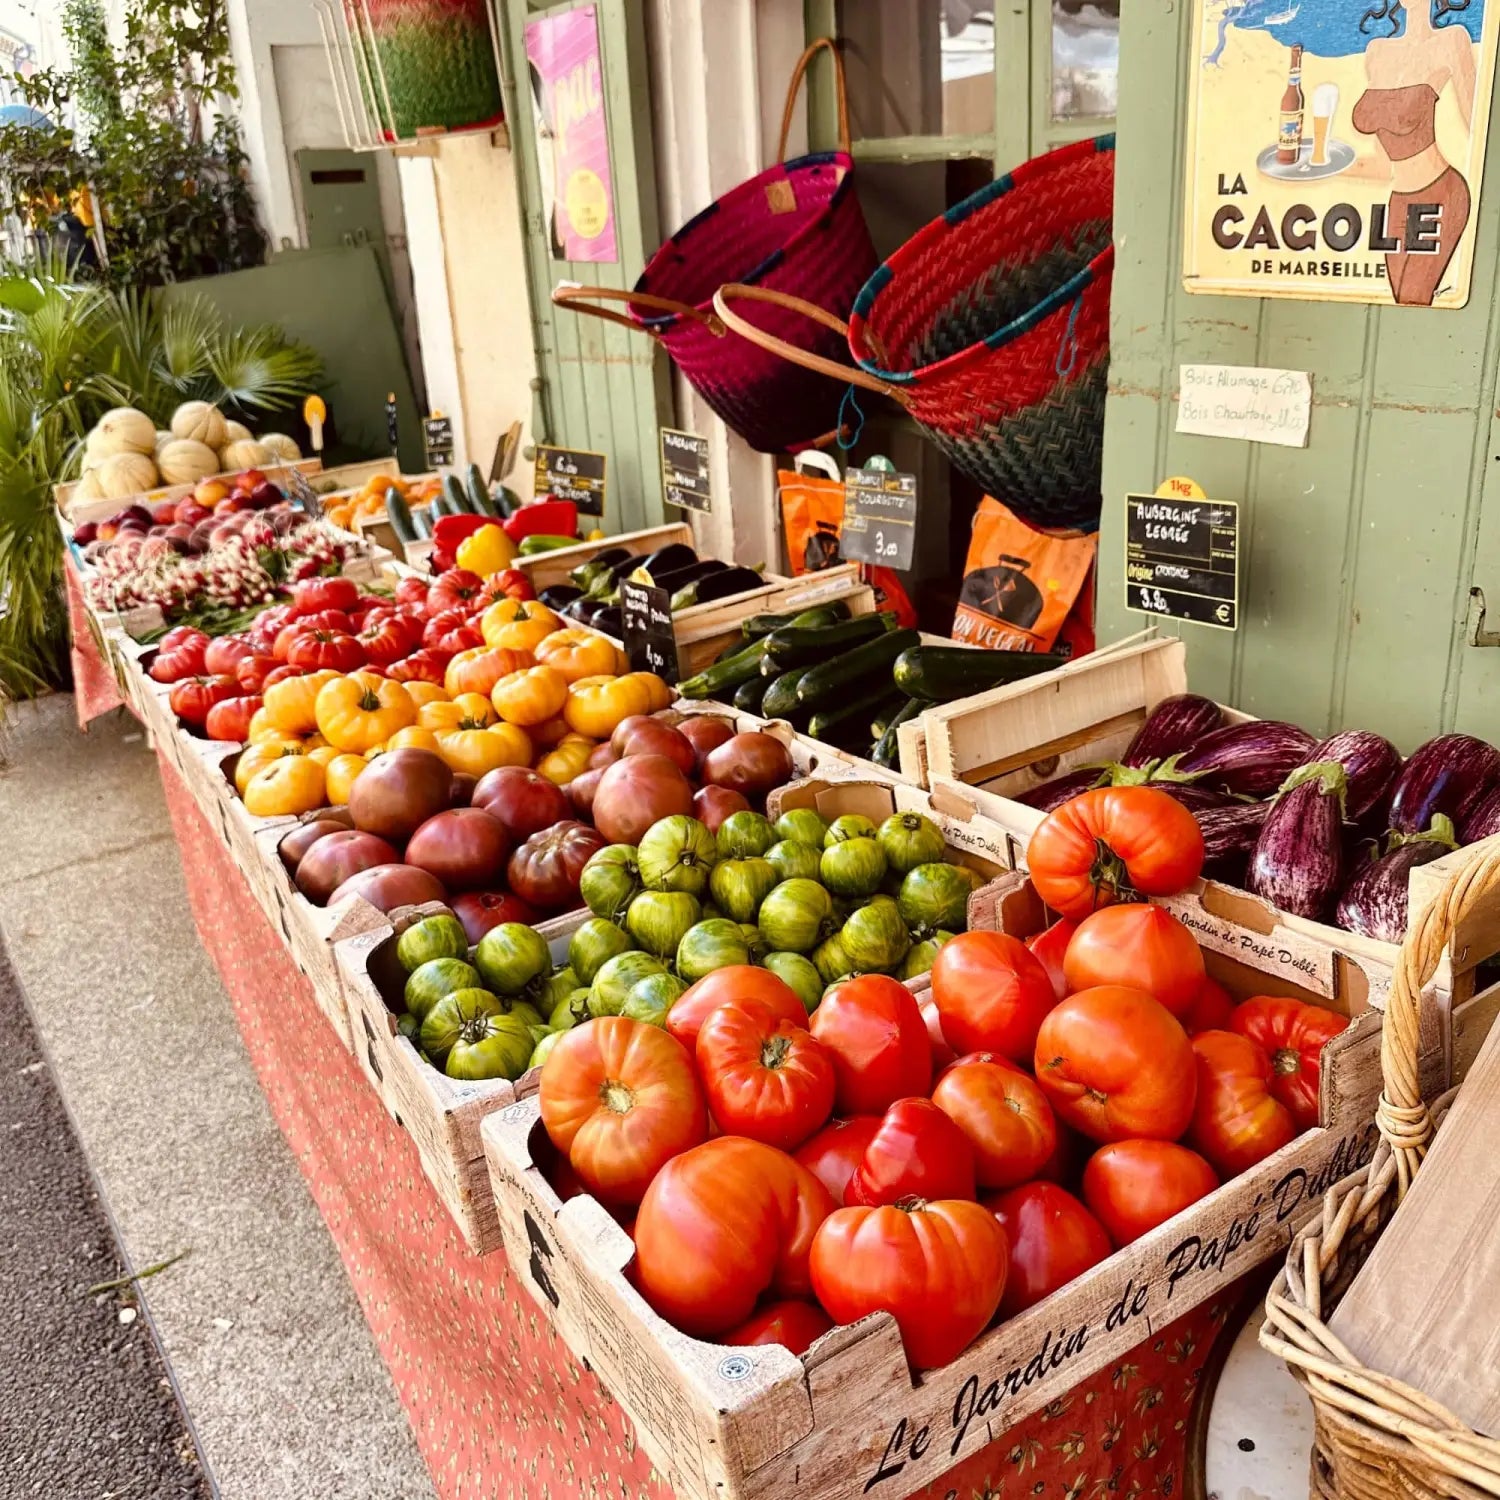 Beautiful tomatoes at the Epicerie in Goult